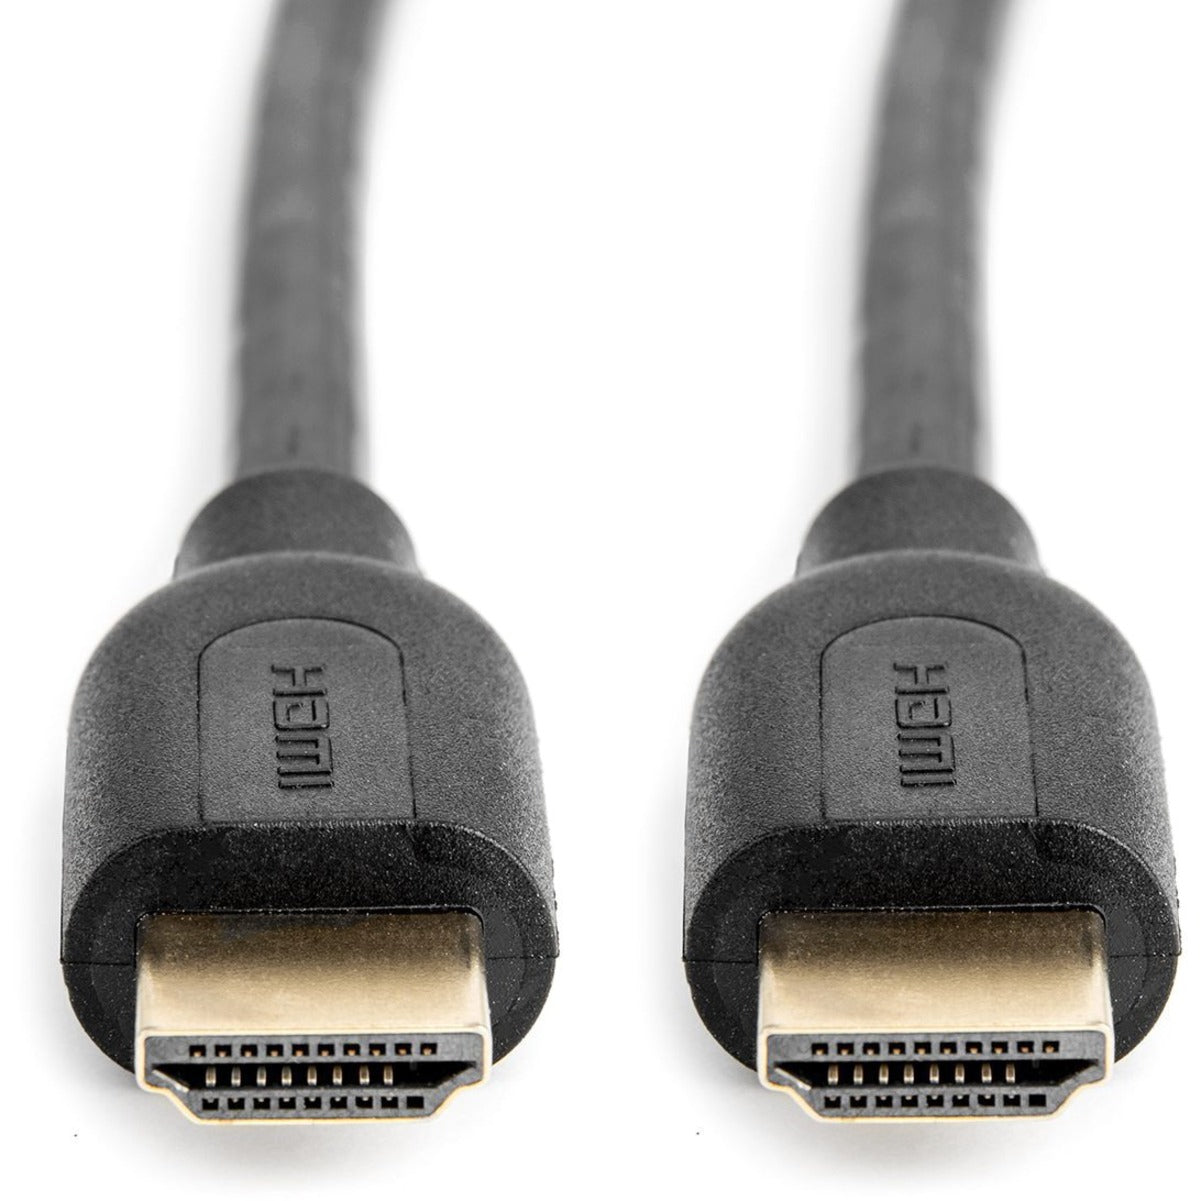 Rocstor Y10C108-B1 Premium High Speed HDMI Cable with Ethernet, 10ft, 10.2 Gbit/s Data Transfer Rate, Gold Plated Connectors